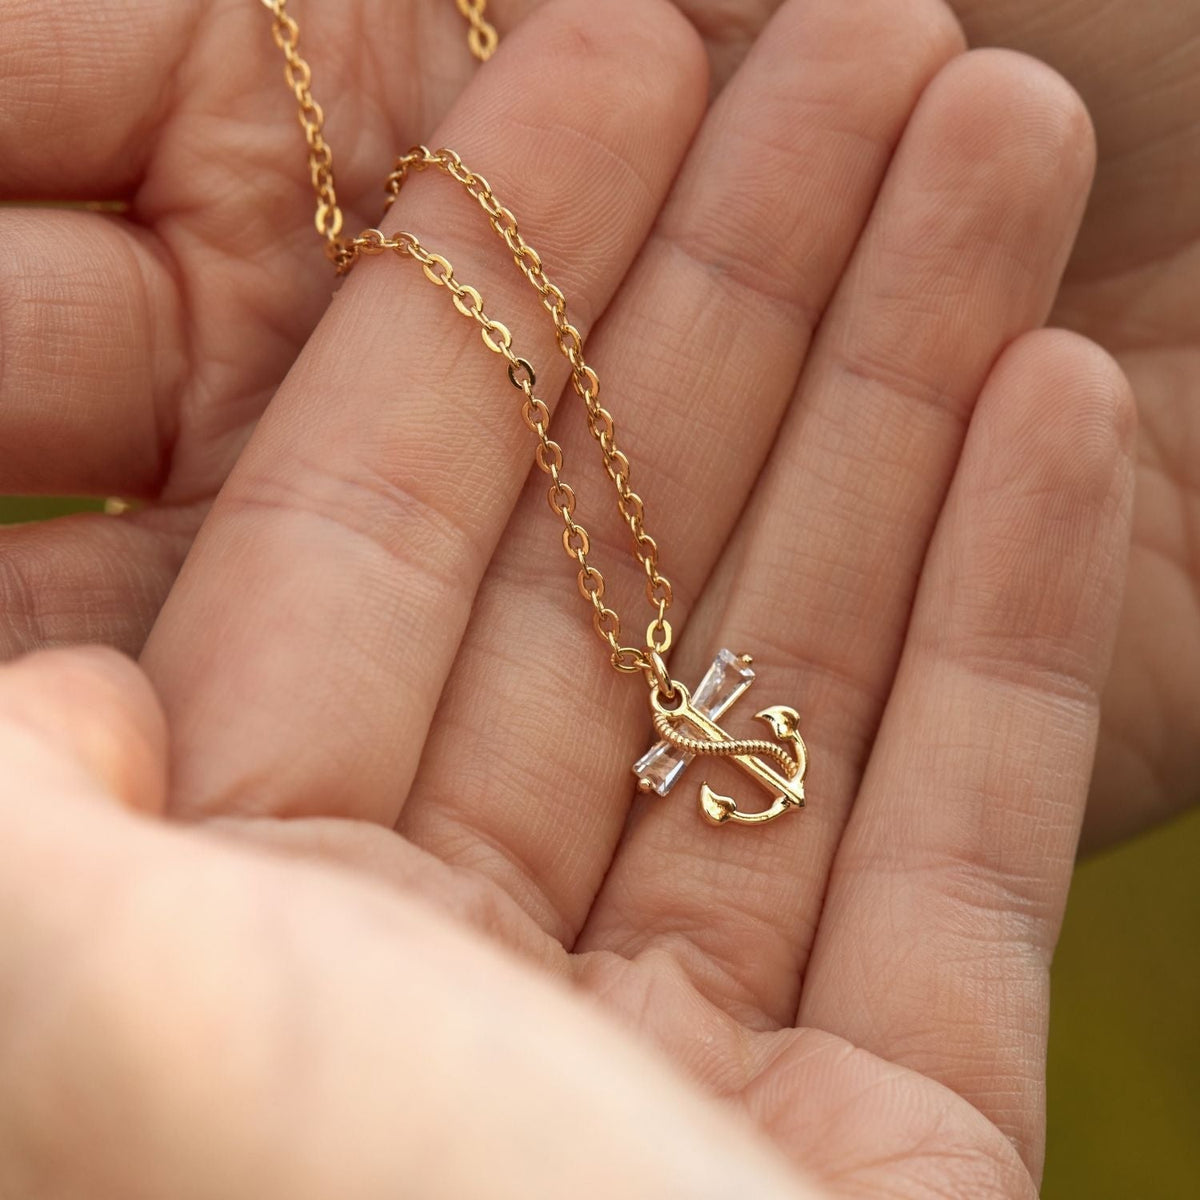 Mother of the Bride (From Daughter) | Forever Your Little Girl | Anchor Necklace